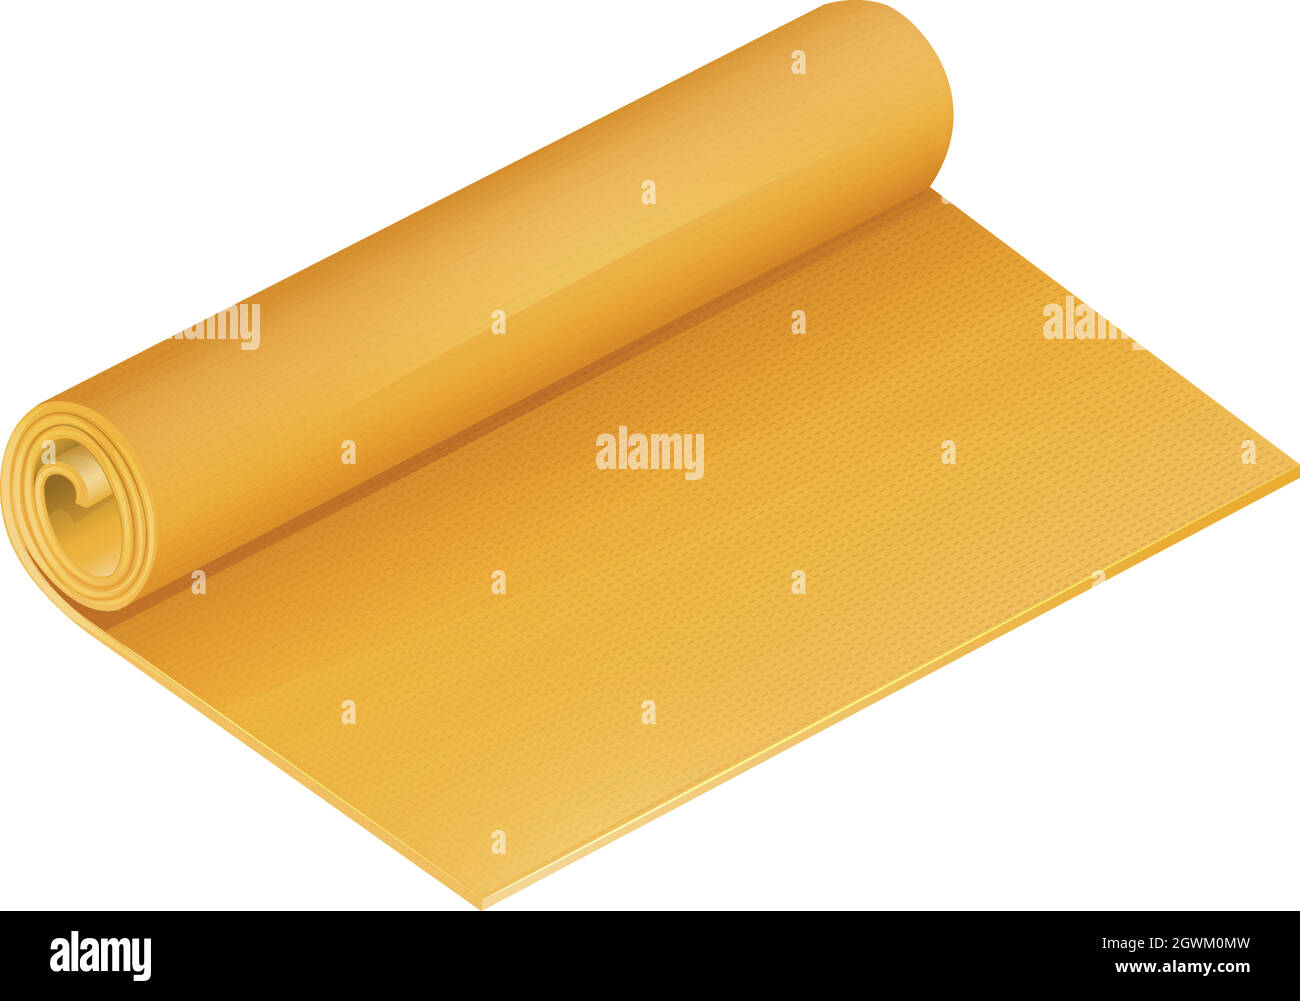 Rolled mat Stock Vector